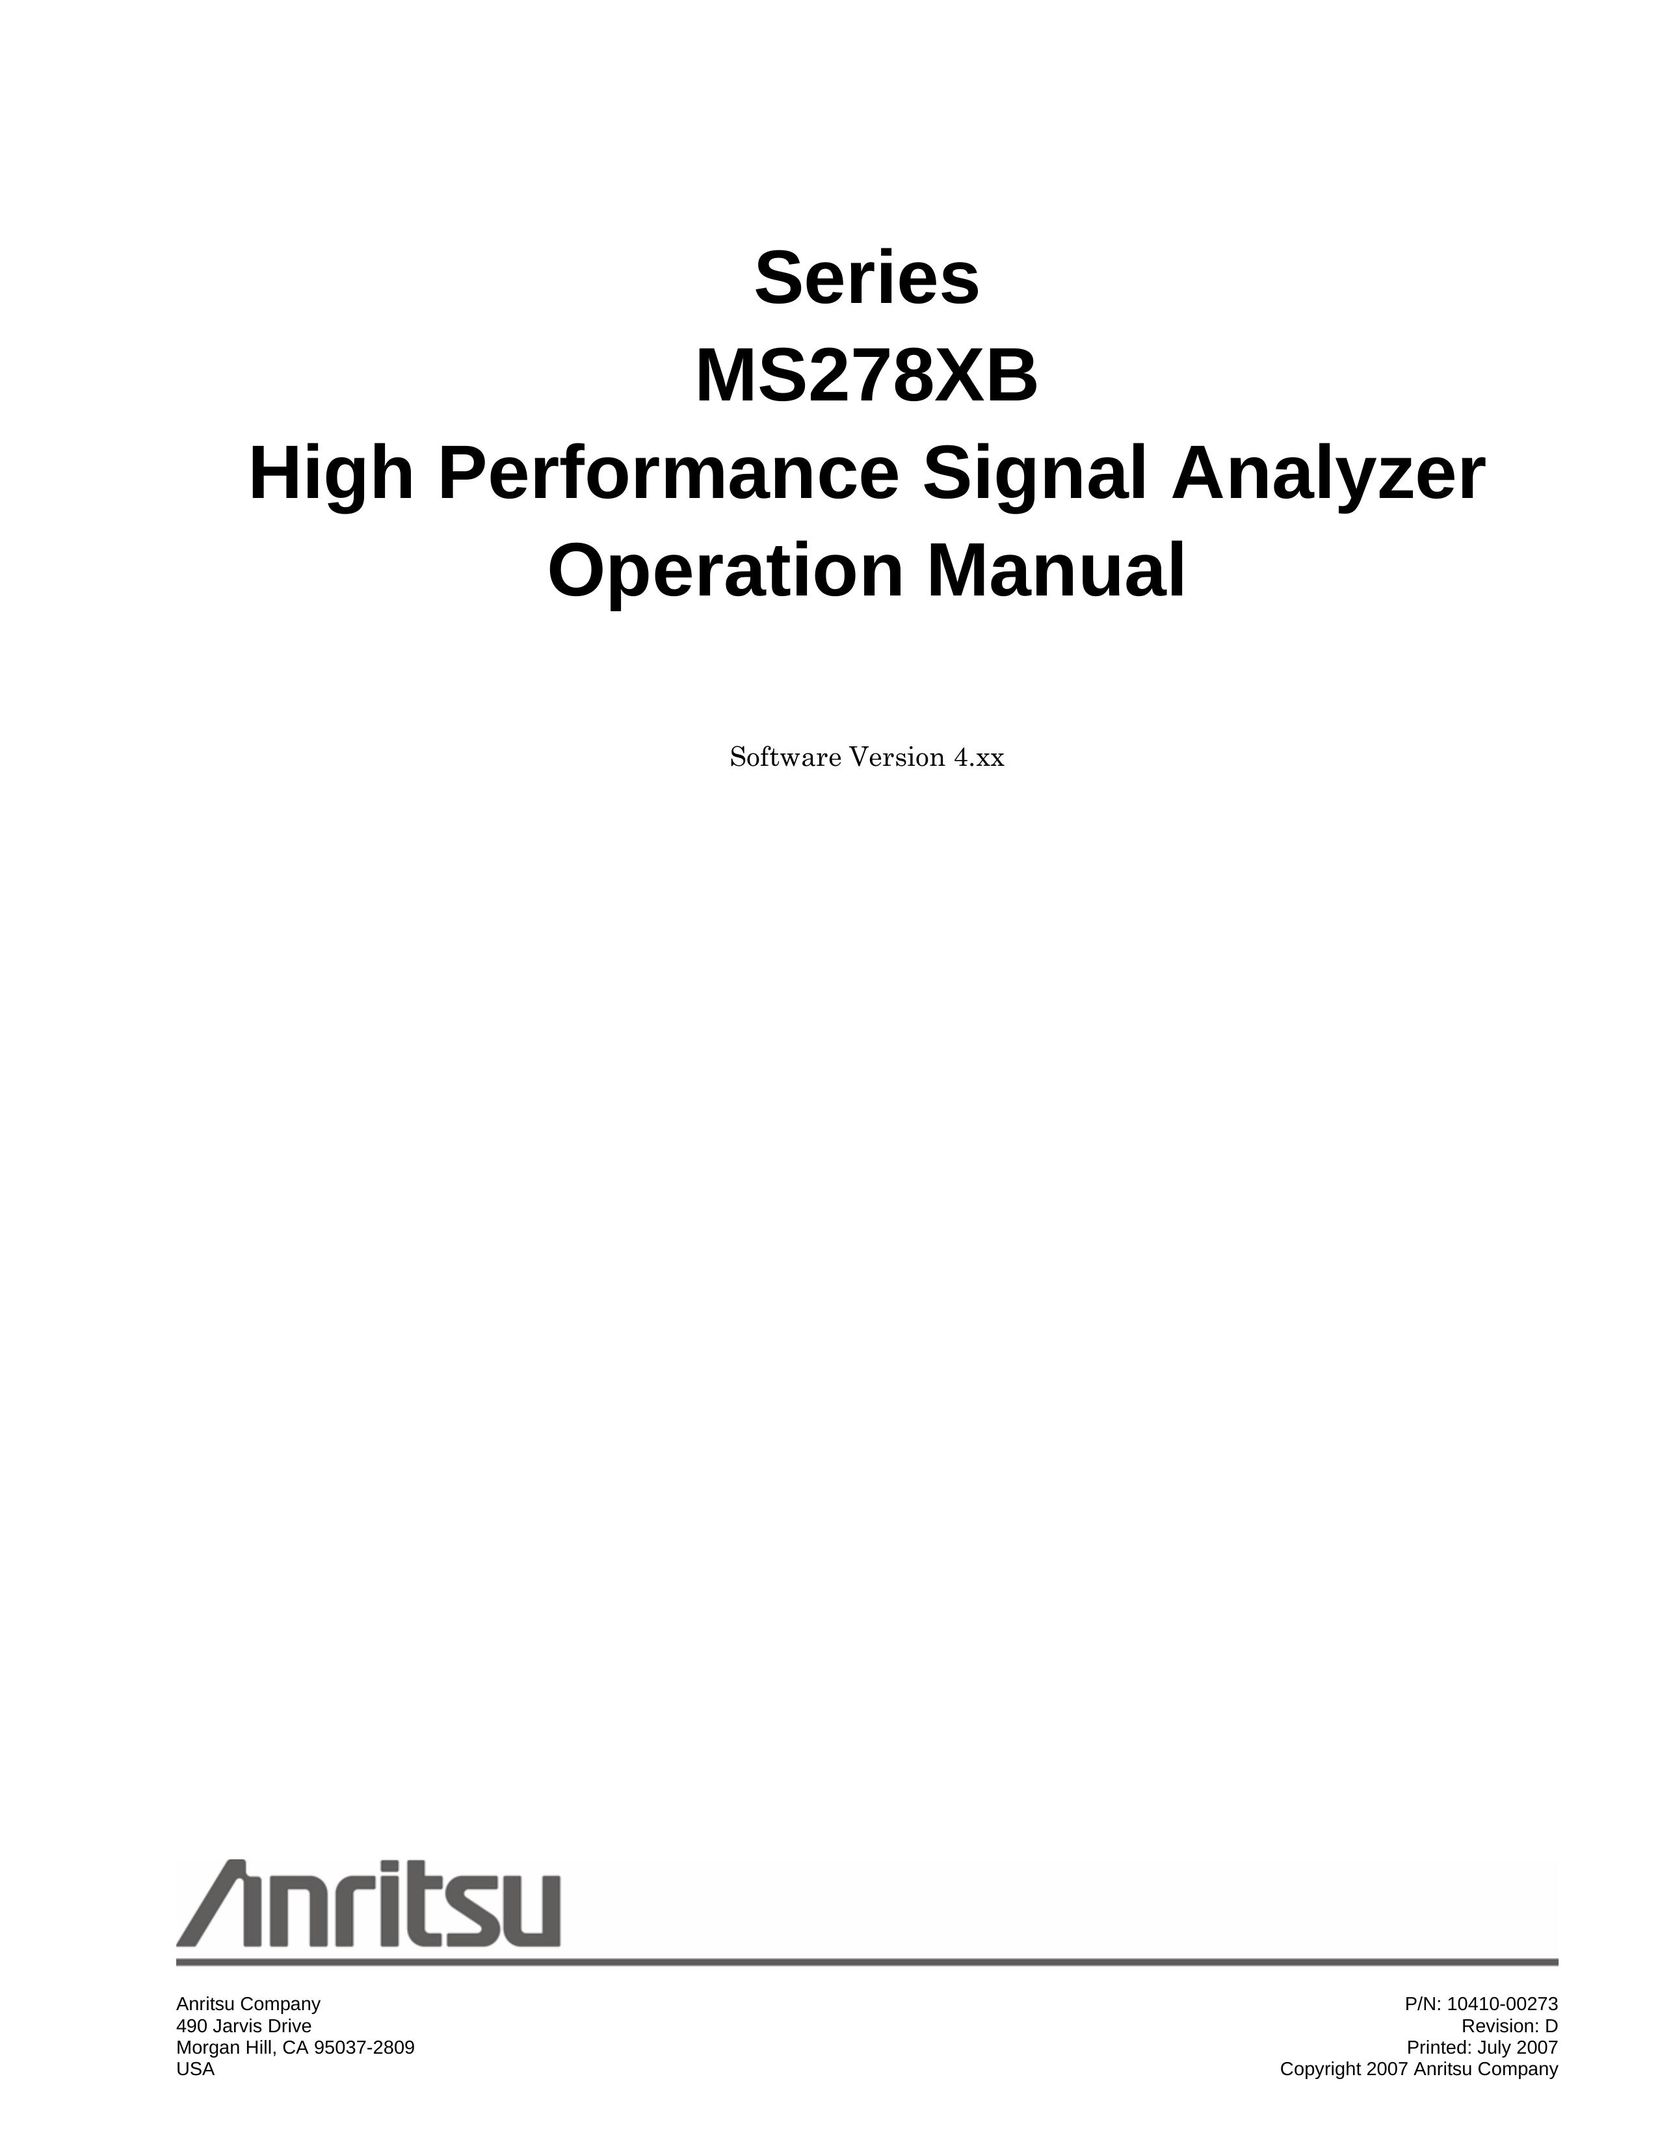 Anritsu Series MS278XB Network Router User Manual